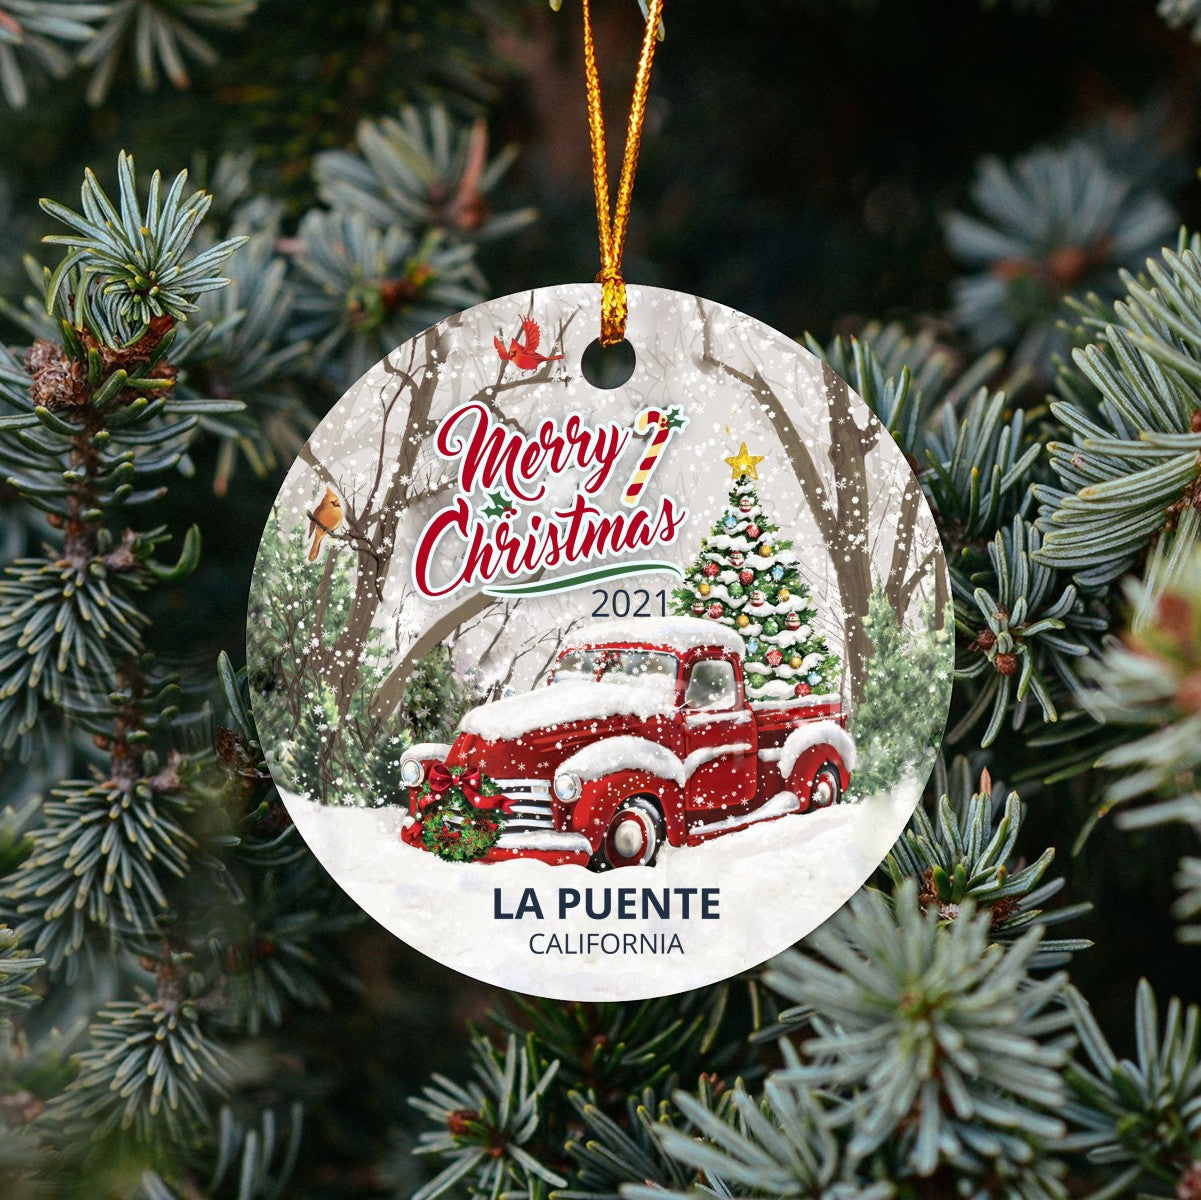 Christmas Tree Ornaments La Puente - Ornament Customize With Name City And State La Puente California CA - Red Truck Xmas Ornaments 3'' Plastic Gift For Family, Friend And Housewarming